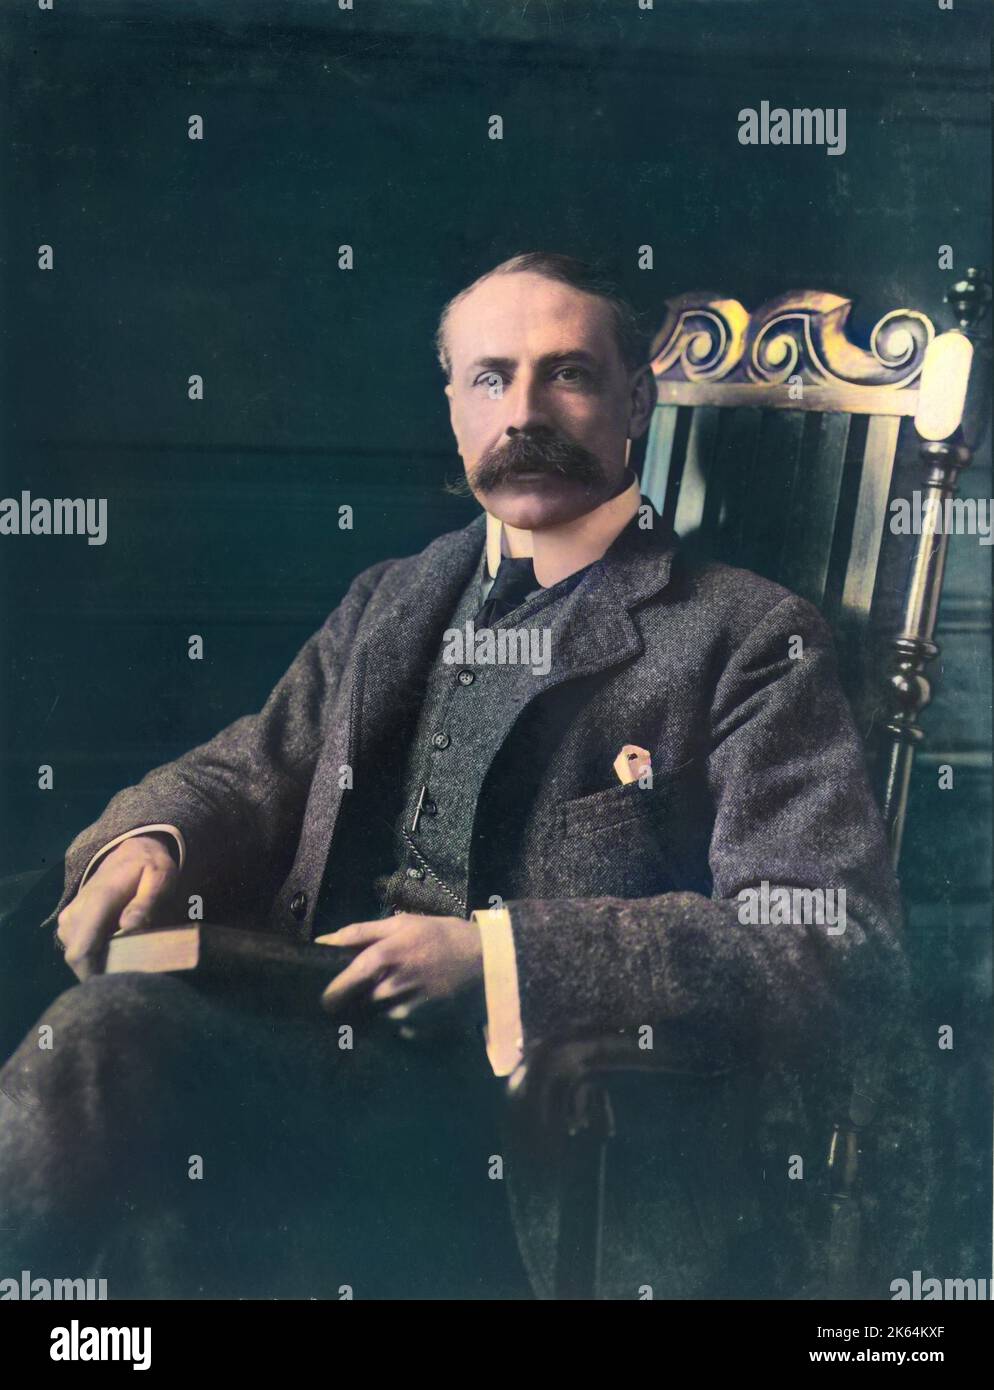 Sir Edward William Elgar, 1st Baronet, OM, GCVO (1857-1934), English composer.  He composed oratorios, chamber music, symphonies, instrumental concertos, and songs, and was appointed Master of the King's Musick in 1924.  He is best known for the Enigma Variations and the Pomp and Circumstance Marches.  Seen here sitting in a chair with a book on his knee. Stock Photo